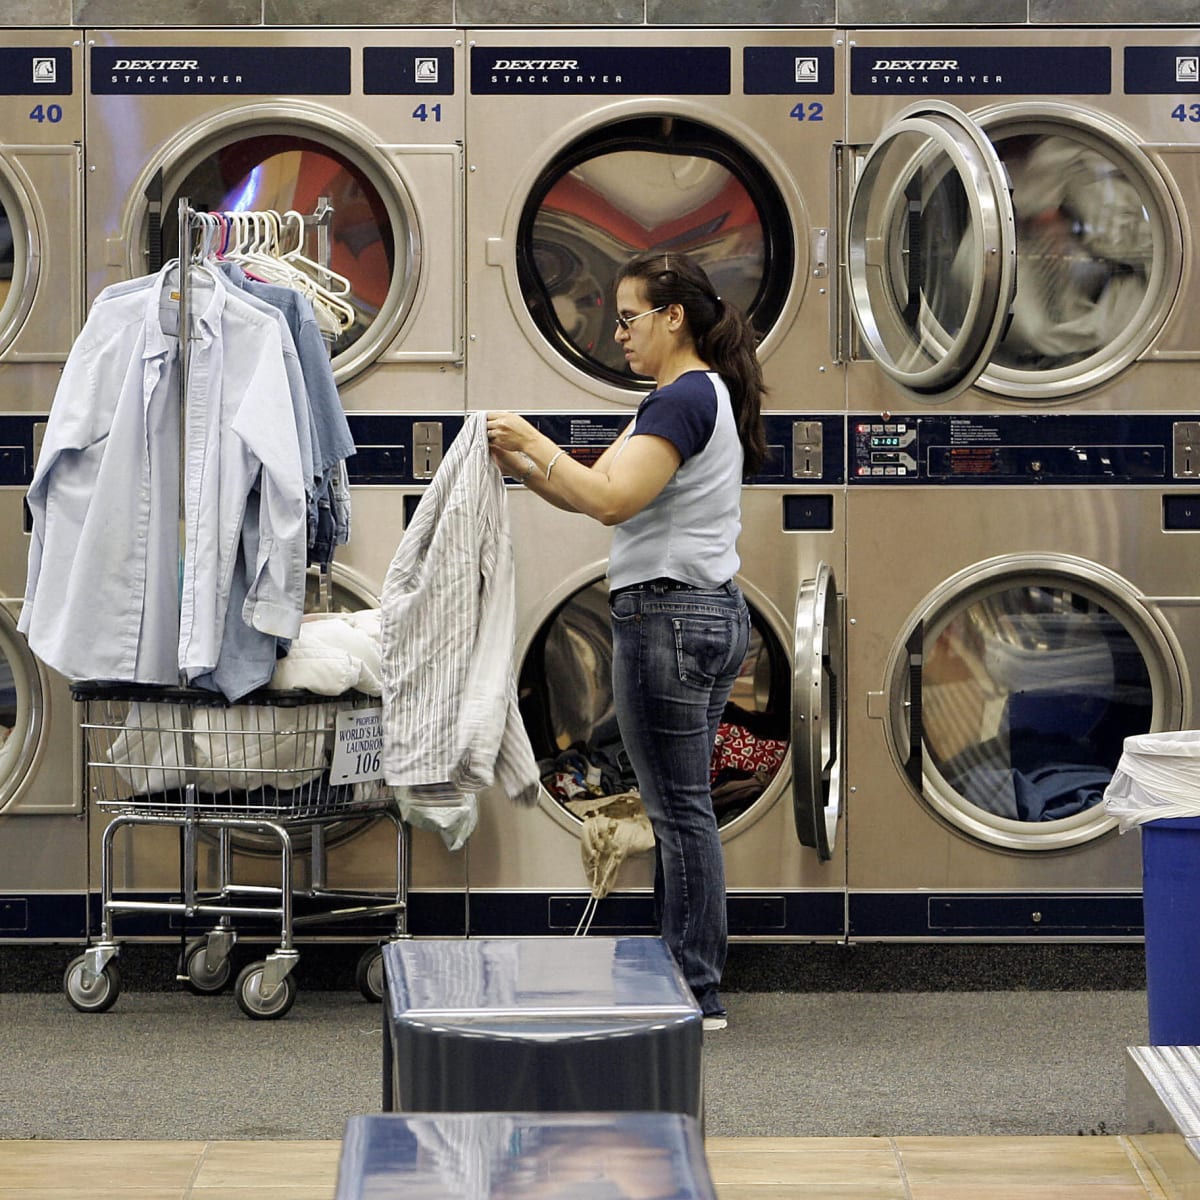 Using a Laundromat or Shared Laundry Room? Here's How to Protect